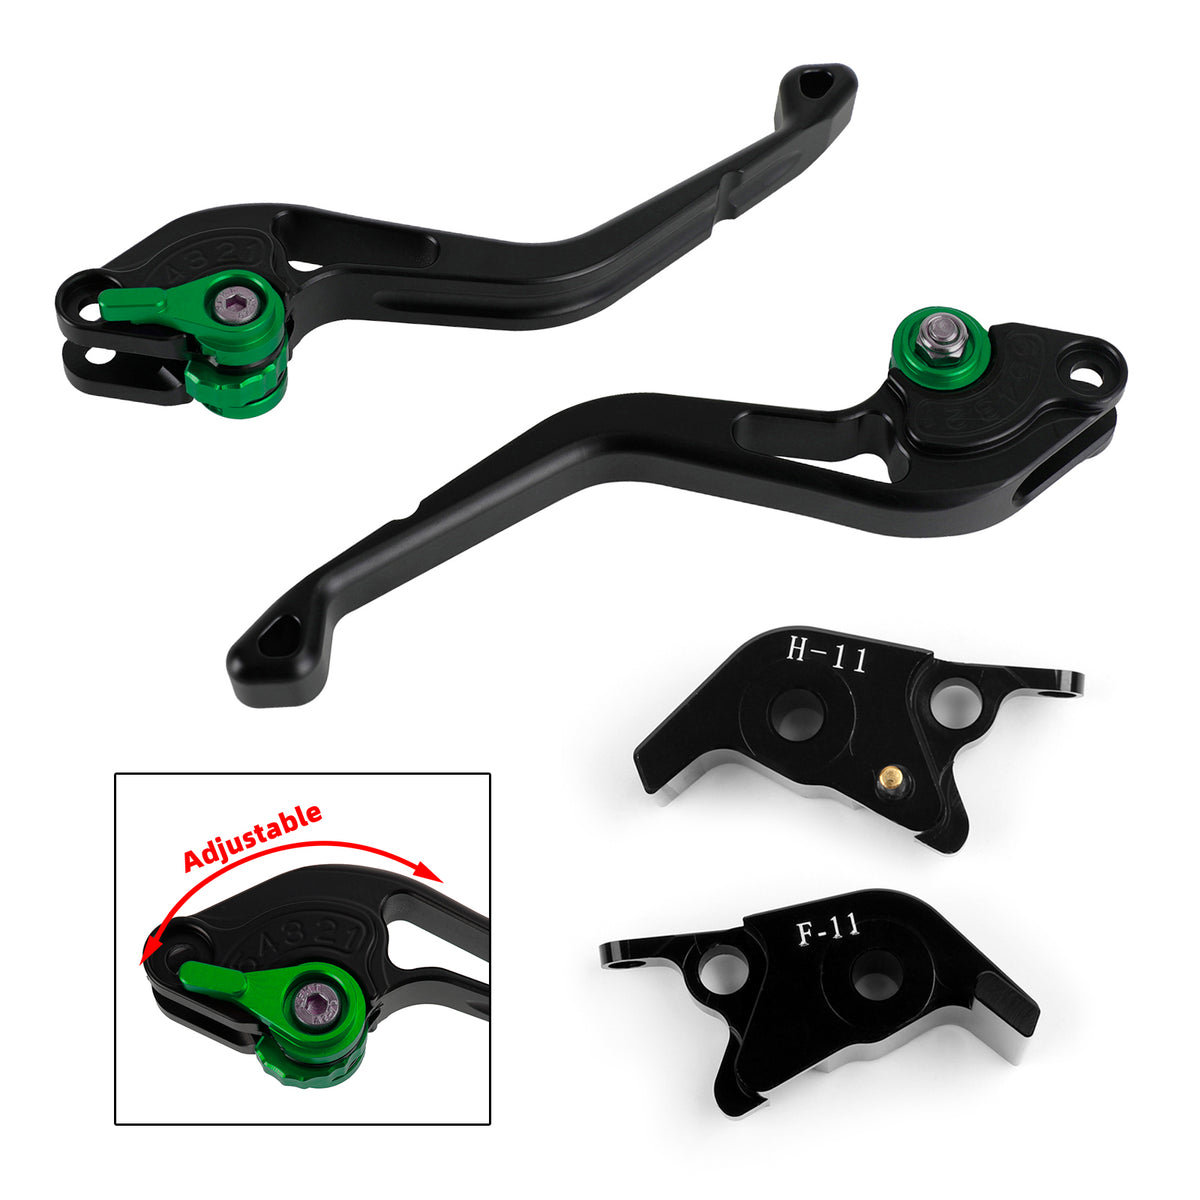 NEW Short Clutch Brake Lever fit for Ducati 749 999/S/R 848 1098 1198 S4RS